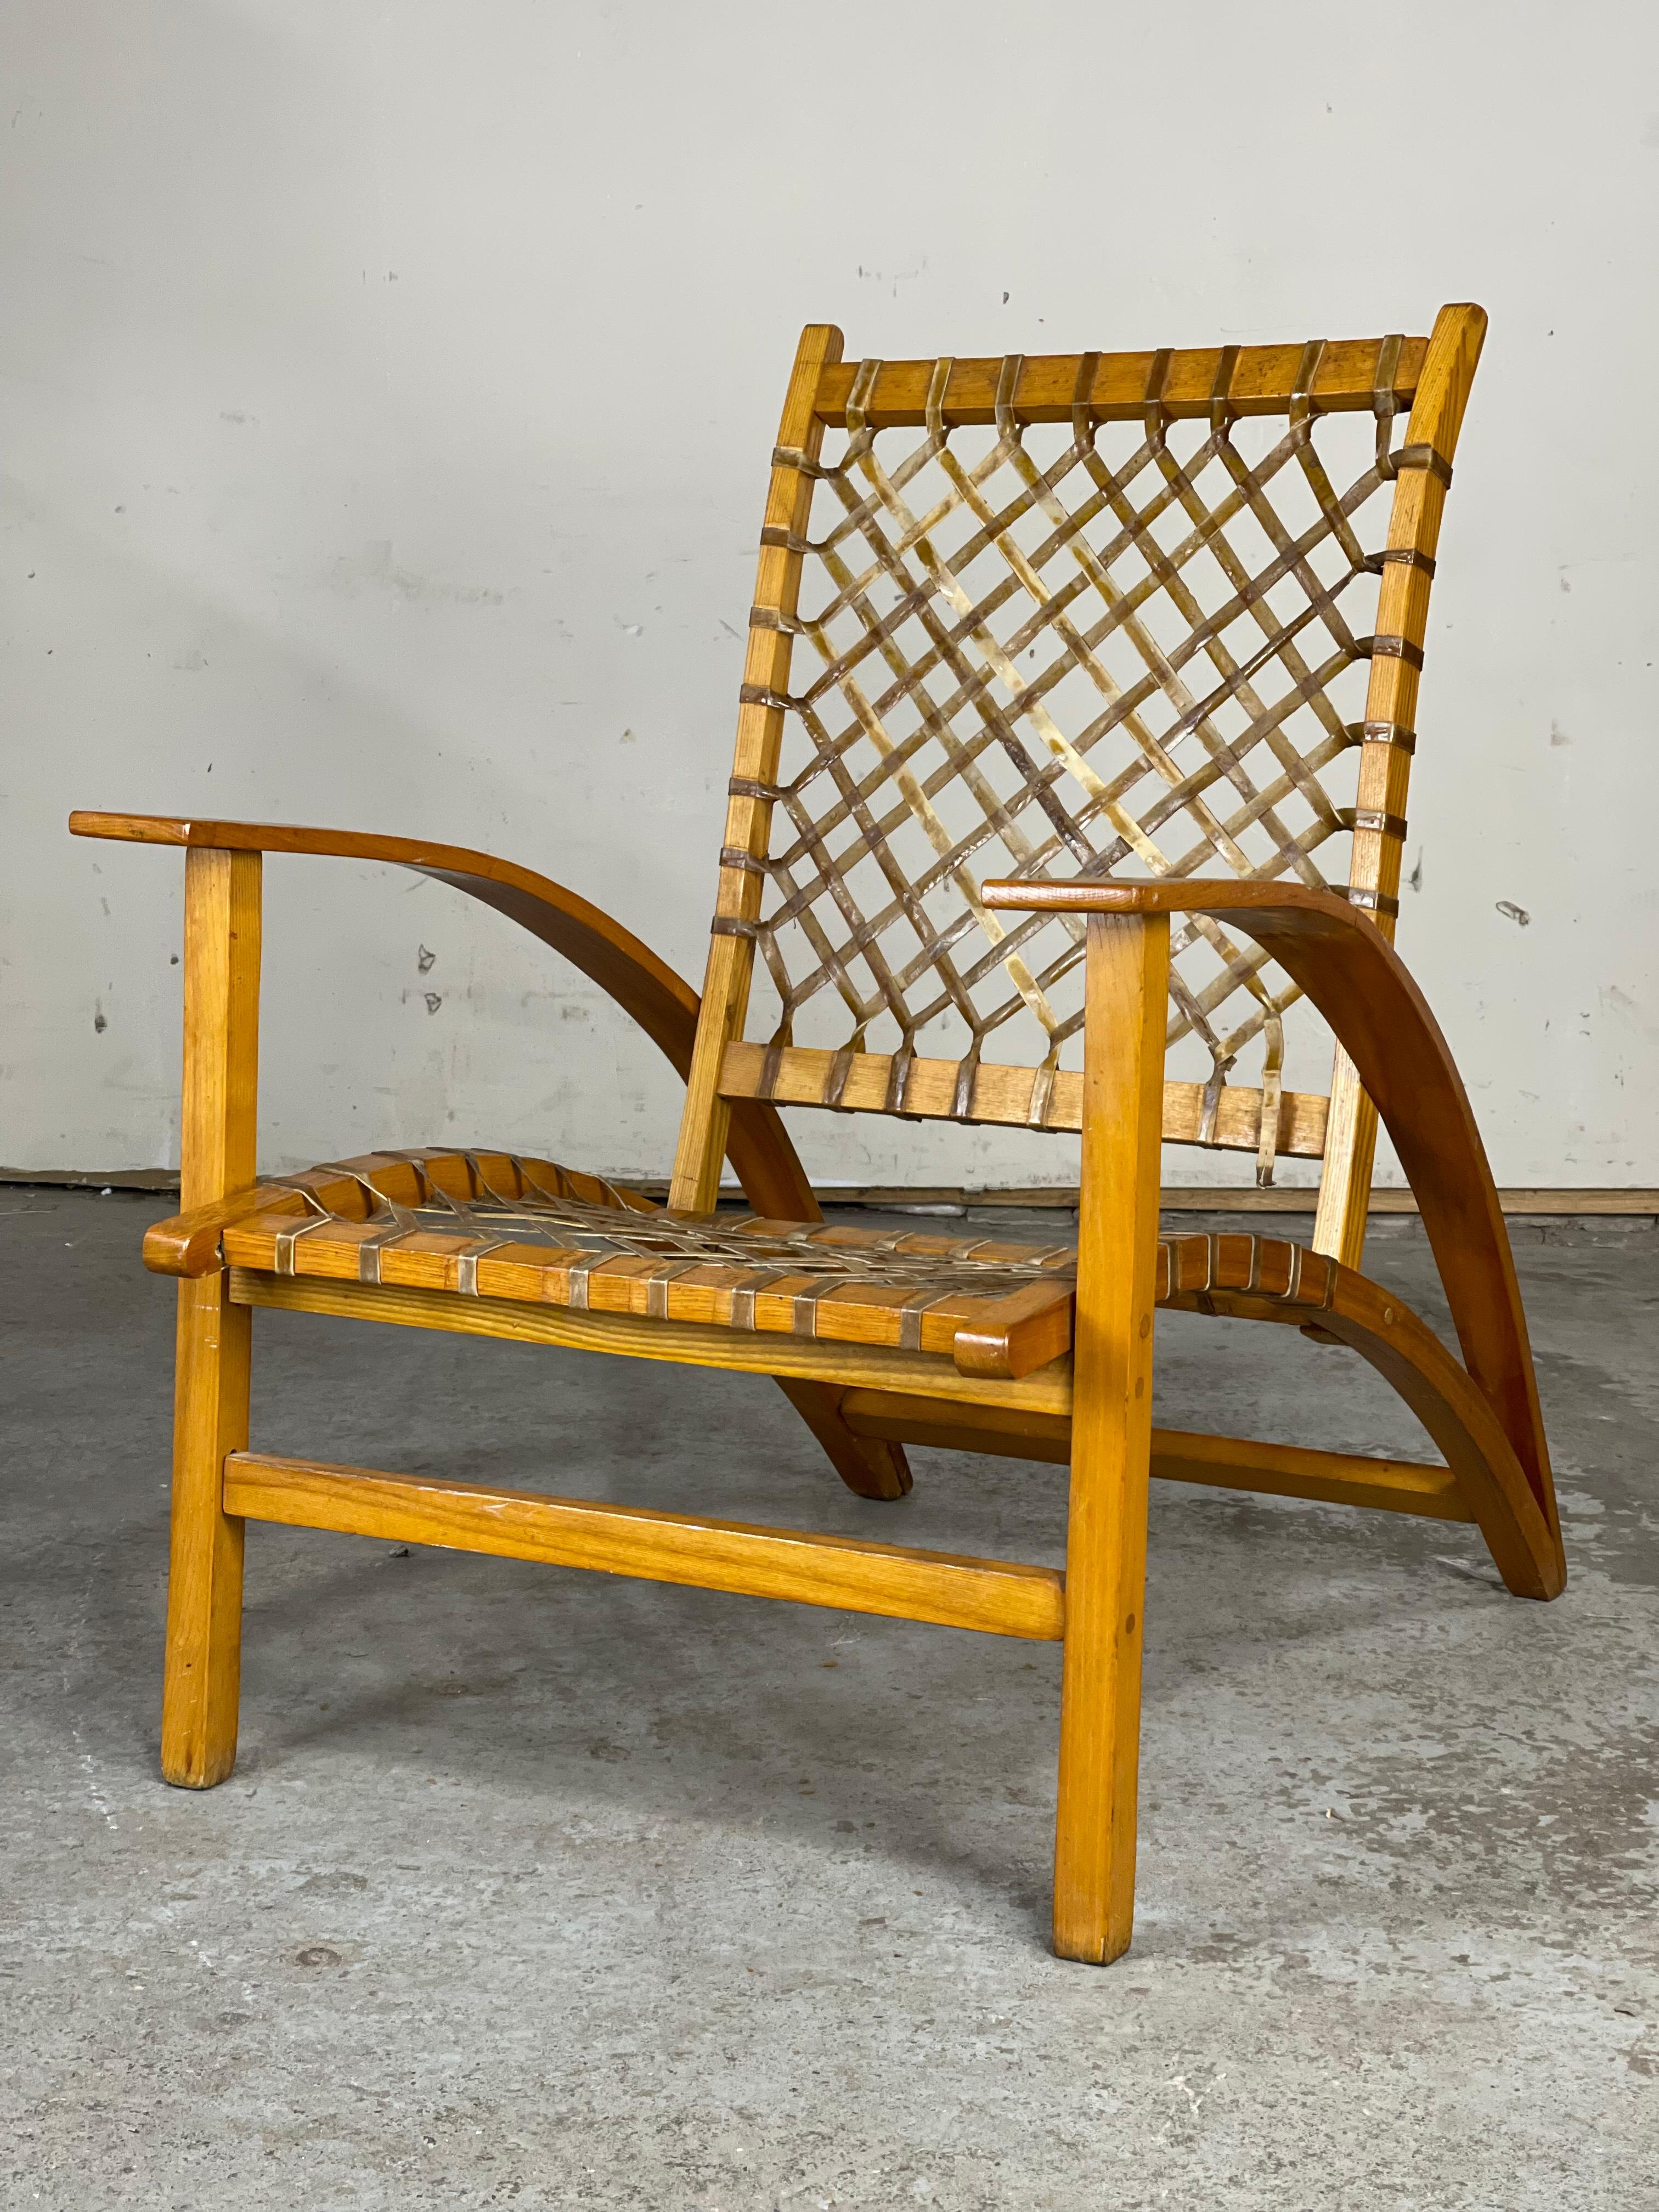 'Snow Shu' Lounge Chair by Carl Koch for Vermont Tubbs 1952 Adirondack Style 7